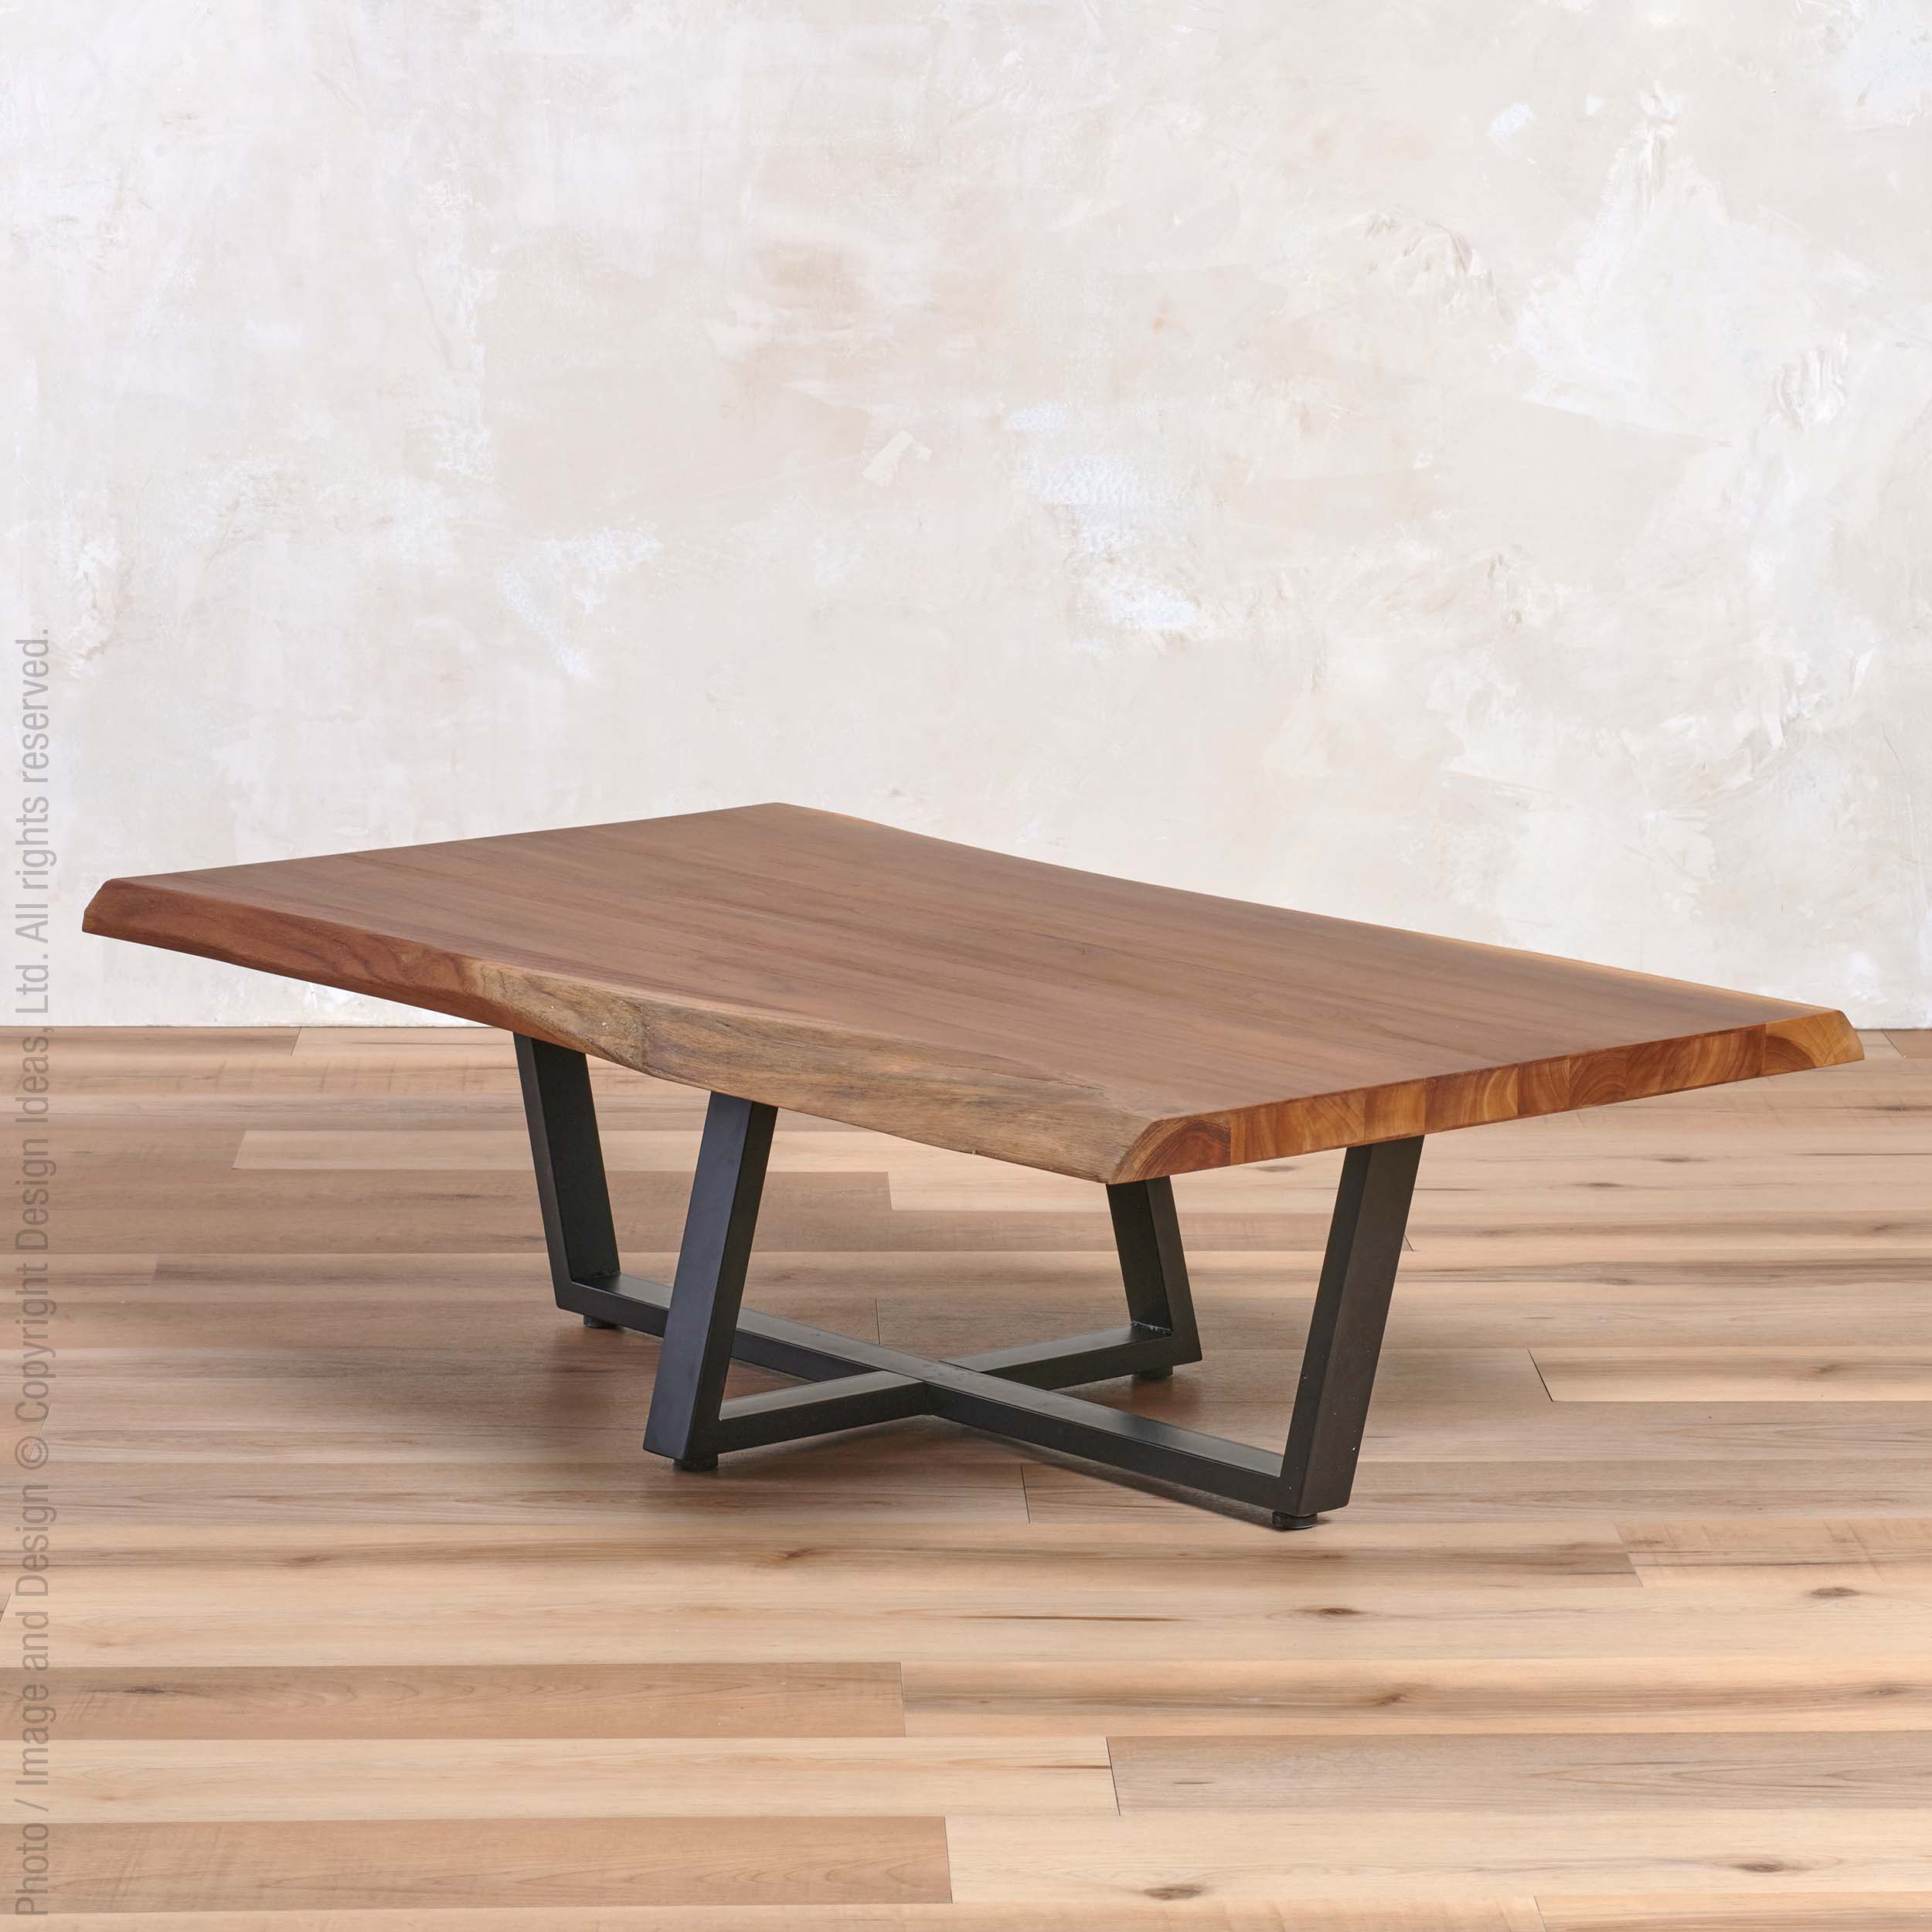 Takara™ live edge coffee table - Natural | Image 1 | Premium Table from the Takara collection | made with Teak for long lasting use | texxture